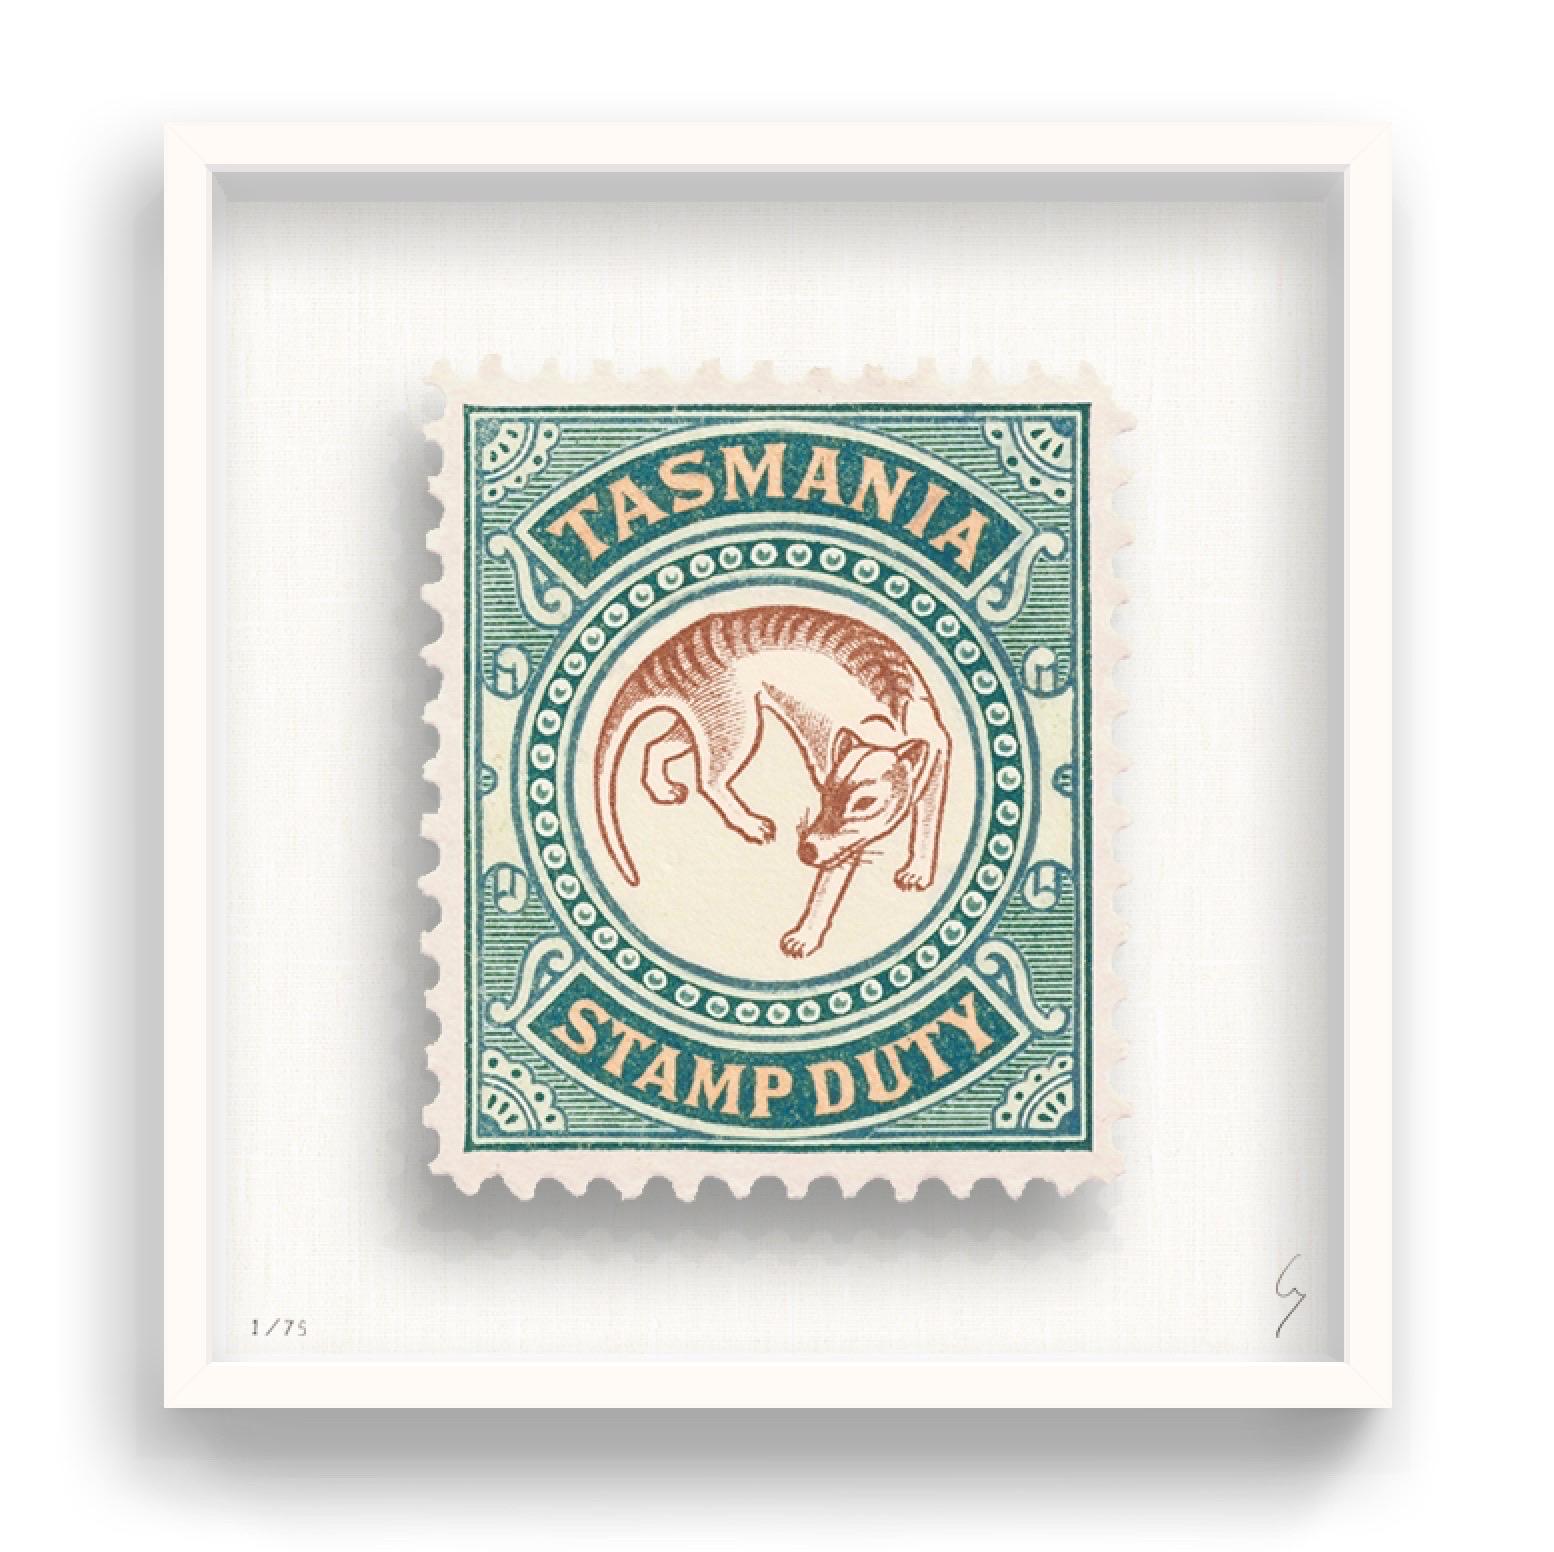 Guy Gee, Tasmania (medium)

Hand-engraved print on 350gsm on G.F Smith card
31 x 35 cm (12 1/5 x 13 4/5)
Frame included 
Edition of 75 

Each artwork by Guy had been digitally reimagined from an original postage stamp. Cut out and finished by hand,